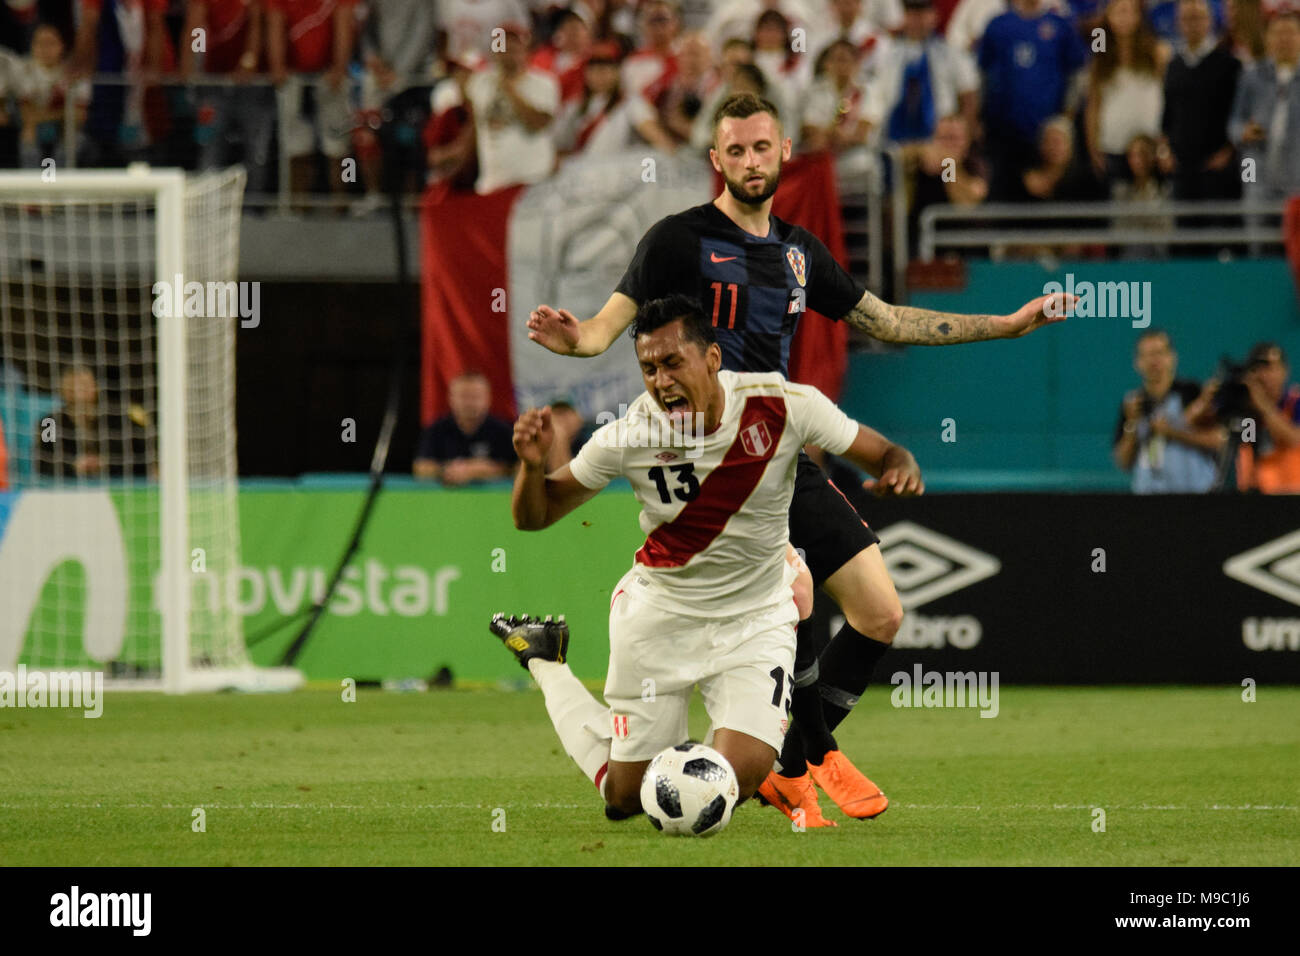 Miami, Florida, USA. 23rd Mar, 2018. Marcelo Brozovic fouls Renato Tapia on the half court.The Croatian national football team played a friendly match against Peru on 23rd March 2018. Credit: Fernando Oduber/SOPA Images/ZUMA Wire/Alamy Live News Stock Photo